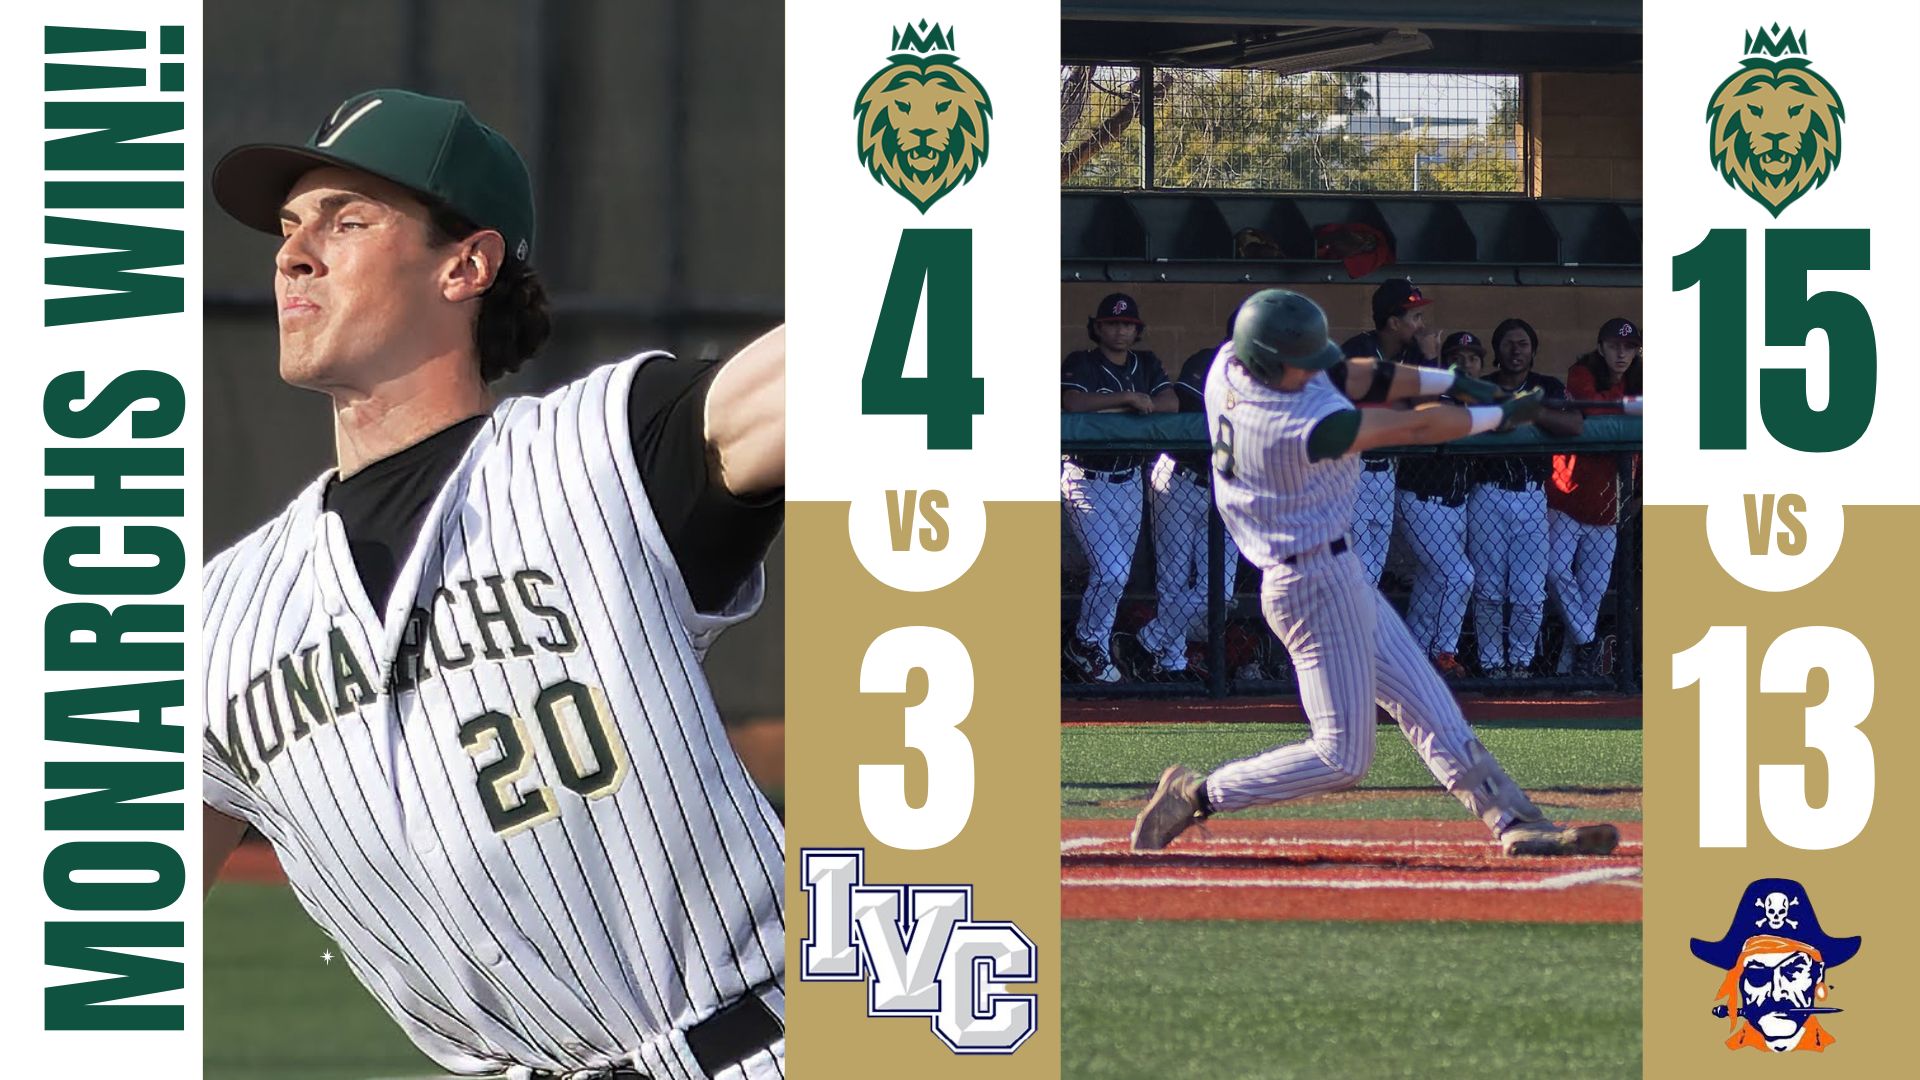 Baseball Finishes Non-Conference Play with Two Wild Wins